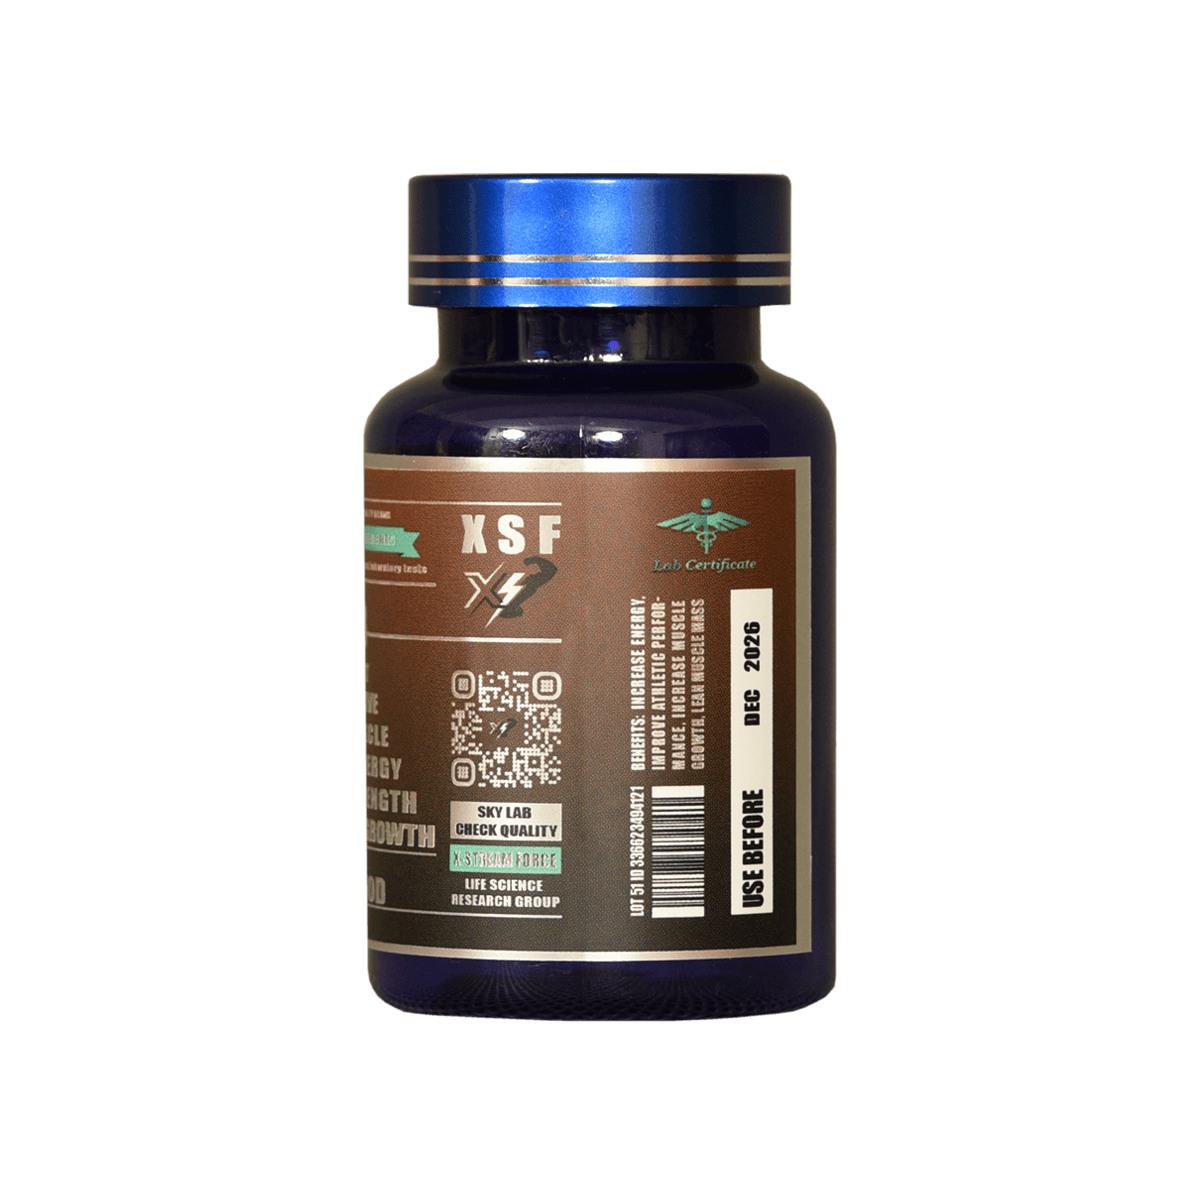 s23-capsules-60-10mg-muscle shop-xstreamforce-for recomp-strength, fat cleaner-mass-hard and dry | X-Stream Force